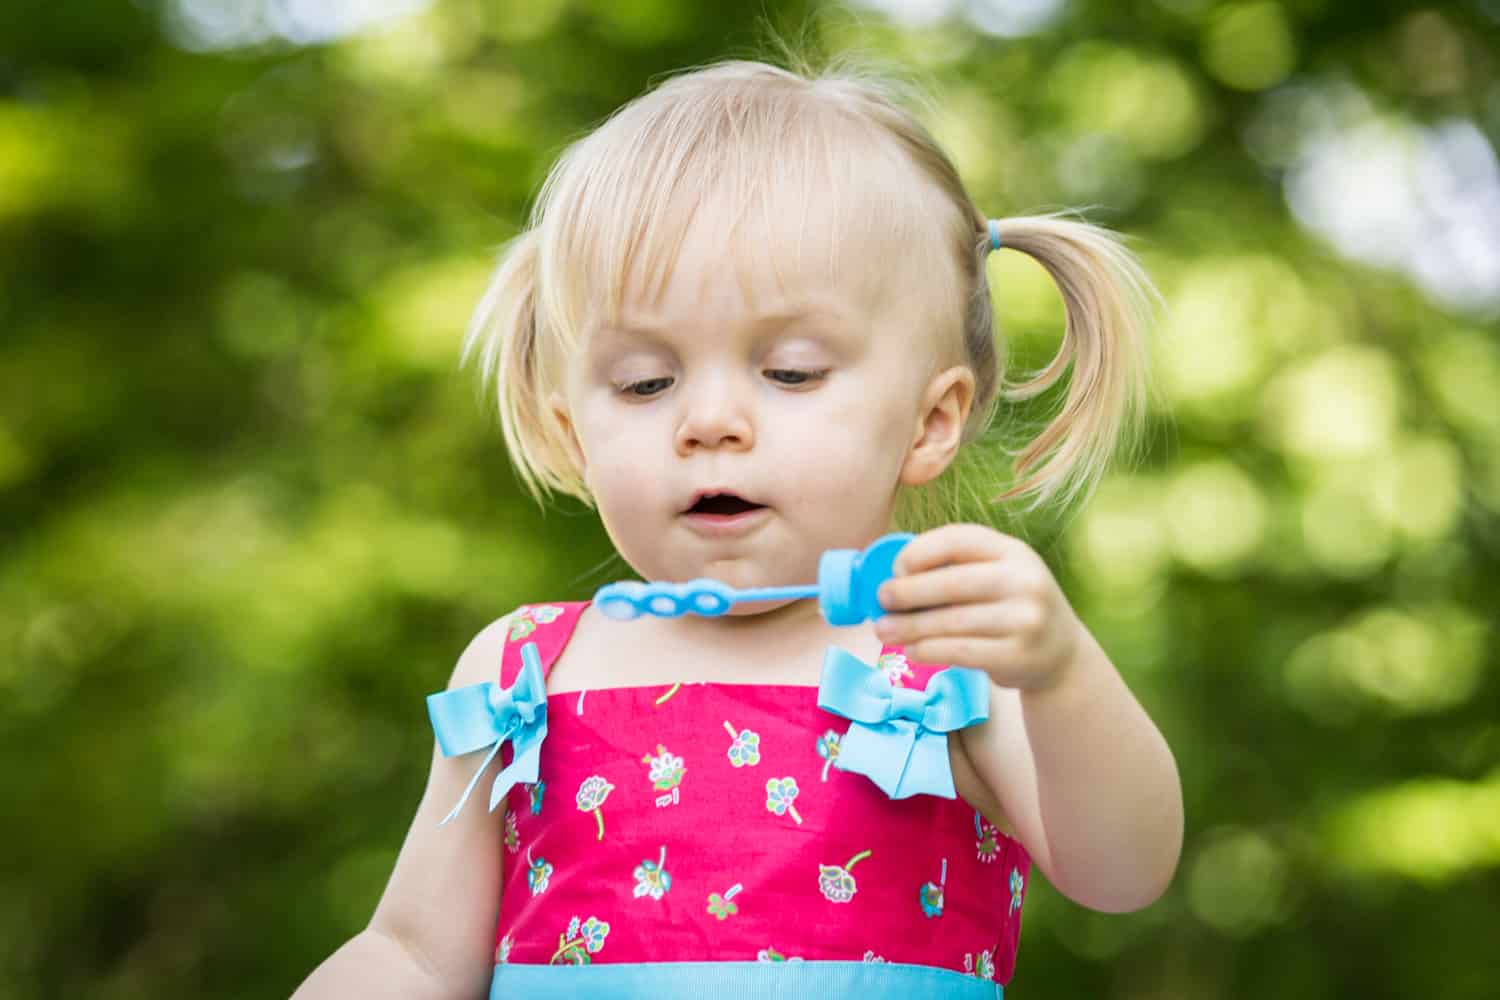 Little girl with pigtails blowing bubbles during a Forest Park family photo shoot